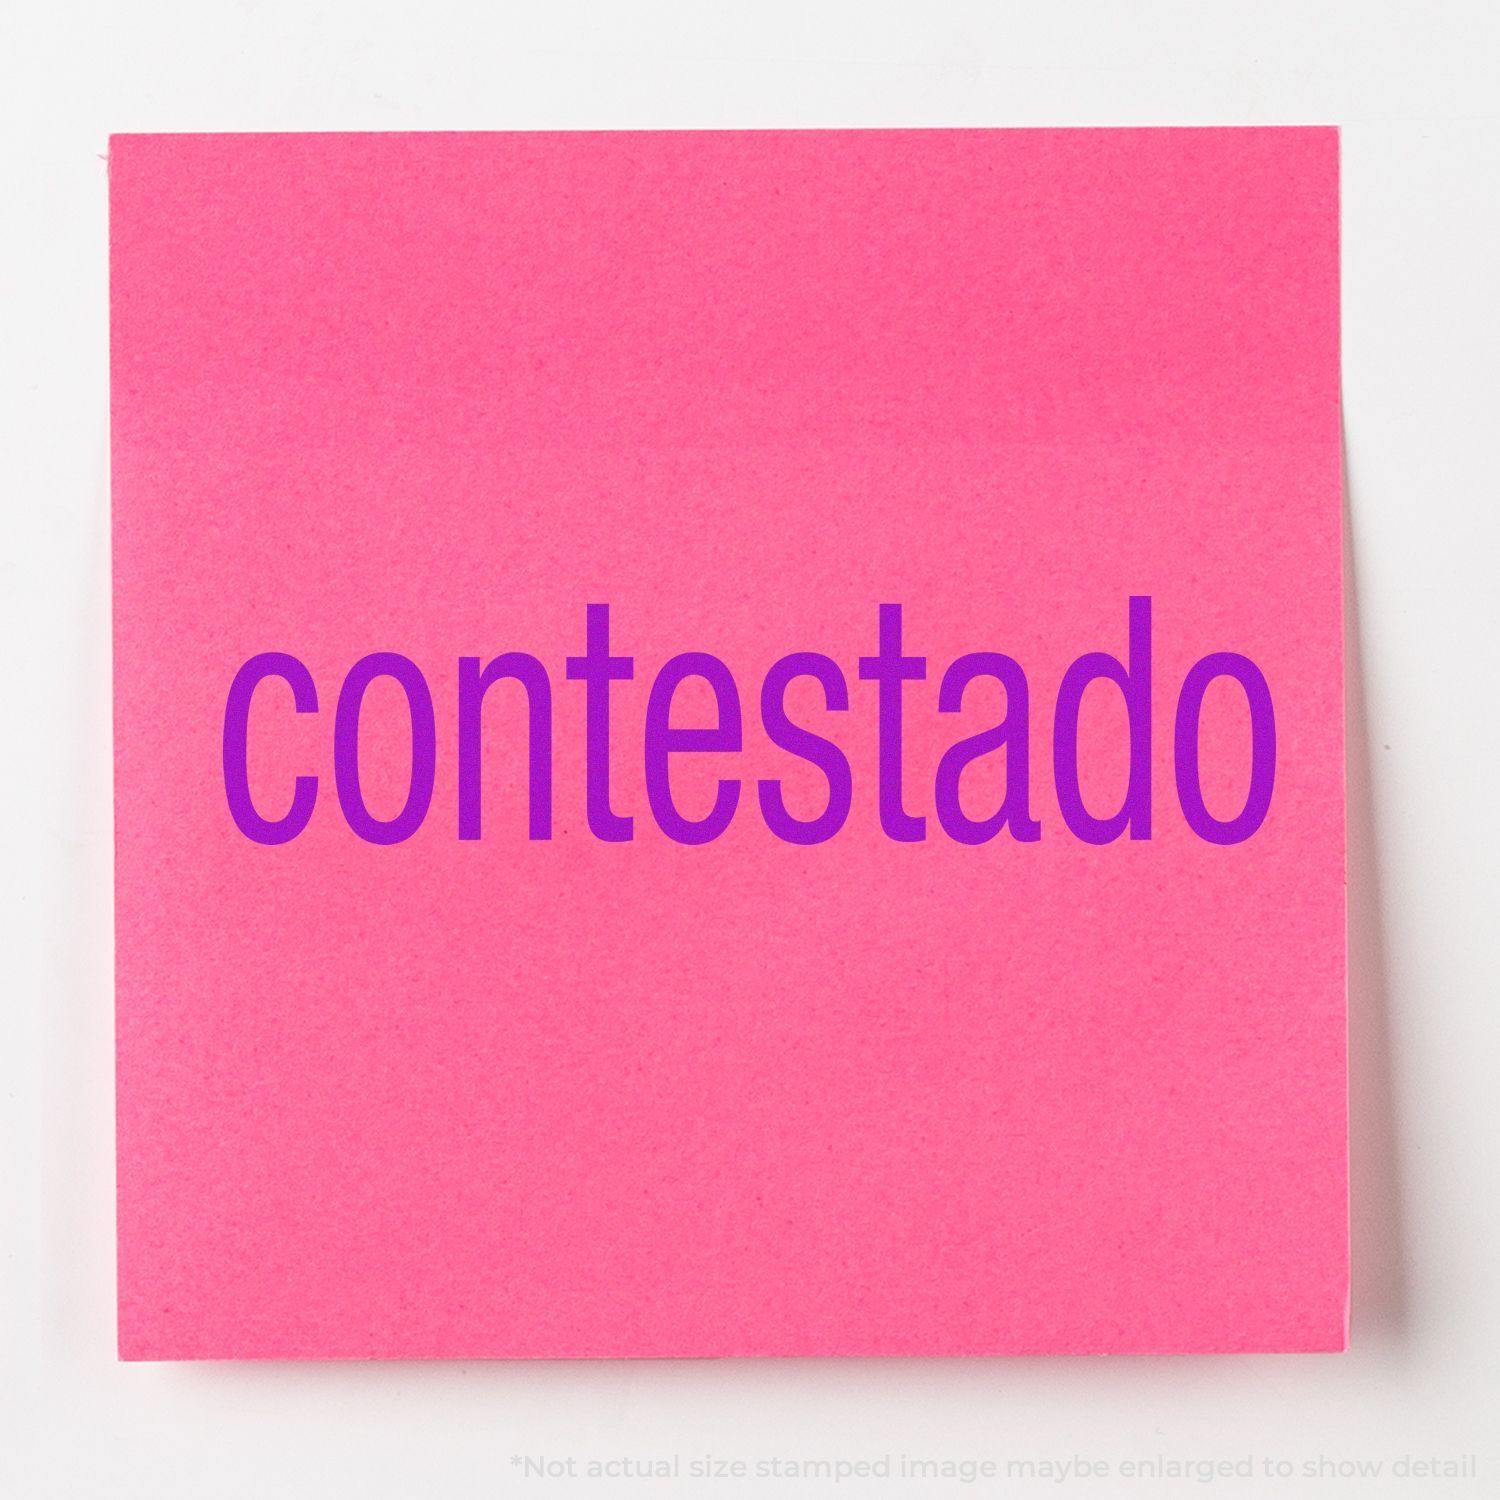 A self-inking stamp with a stamped image showing how the text "contestado" in a large font is displayed by it after stamping.